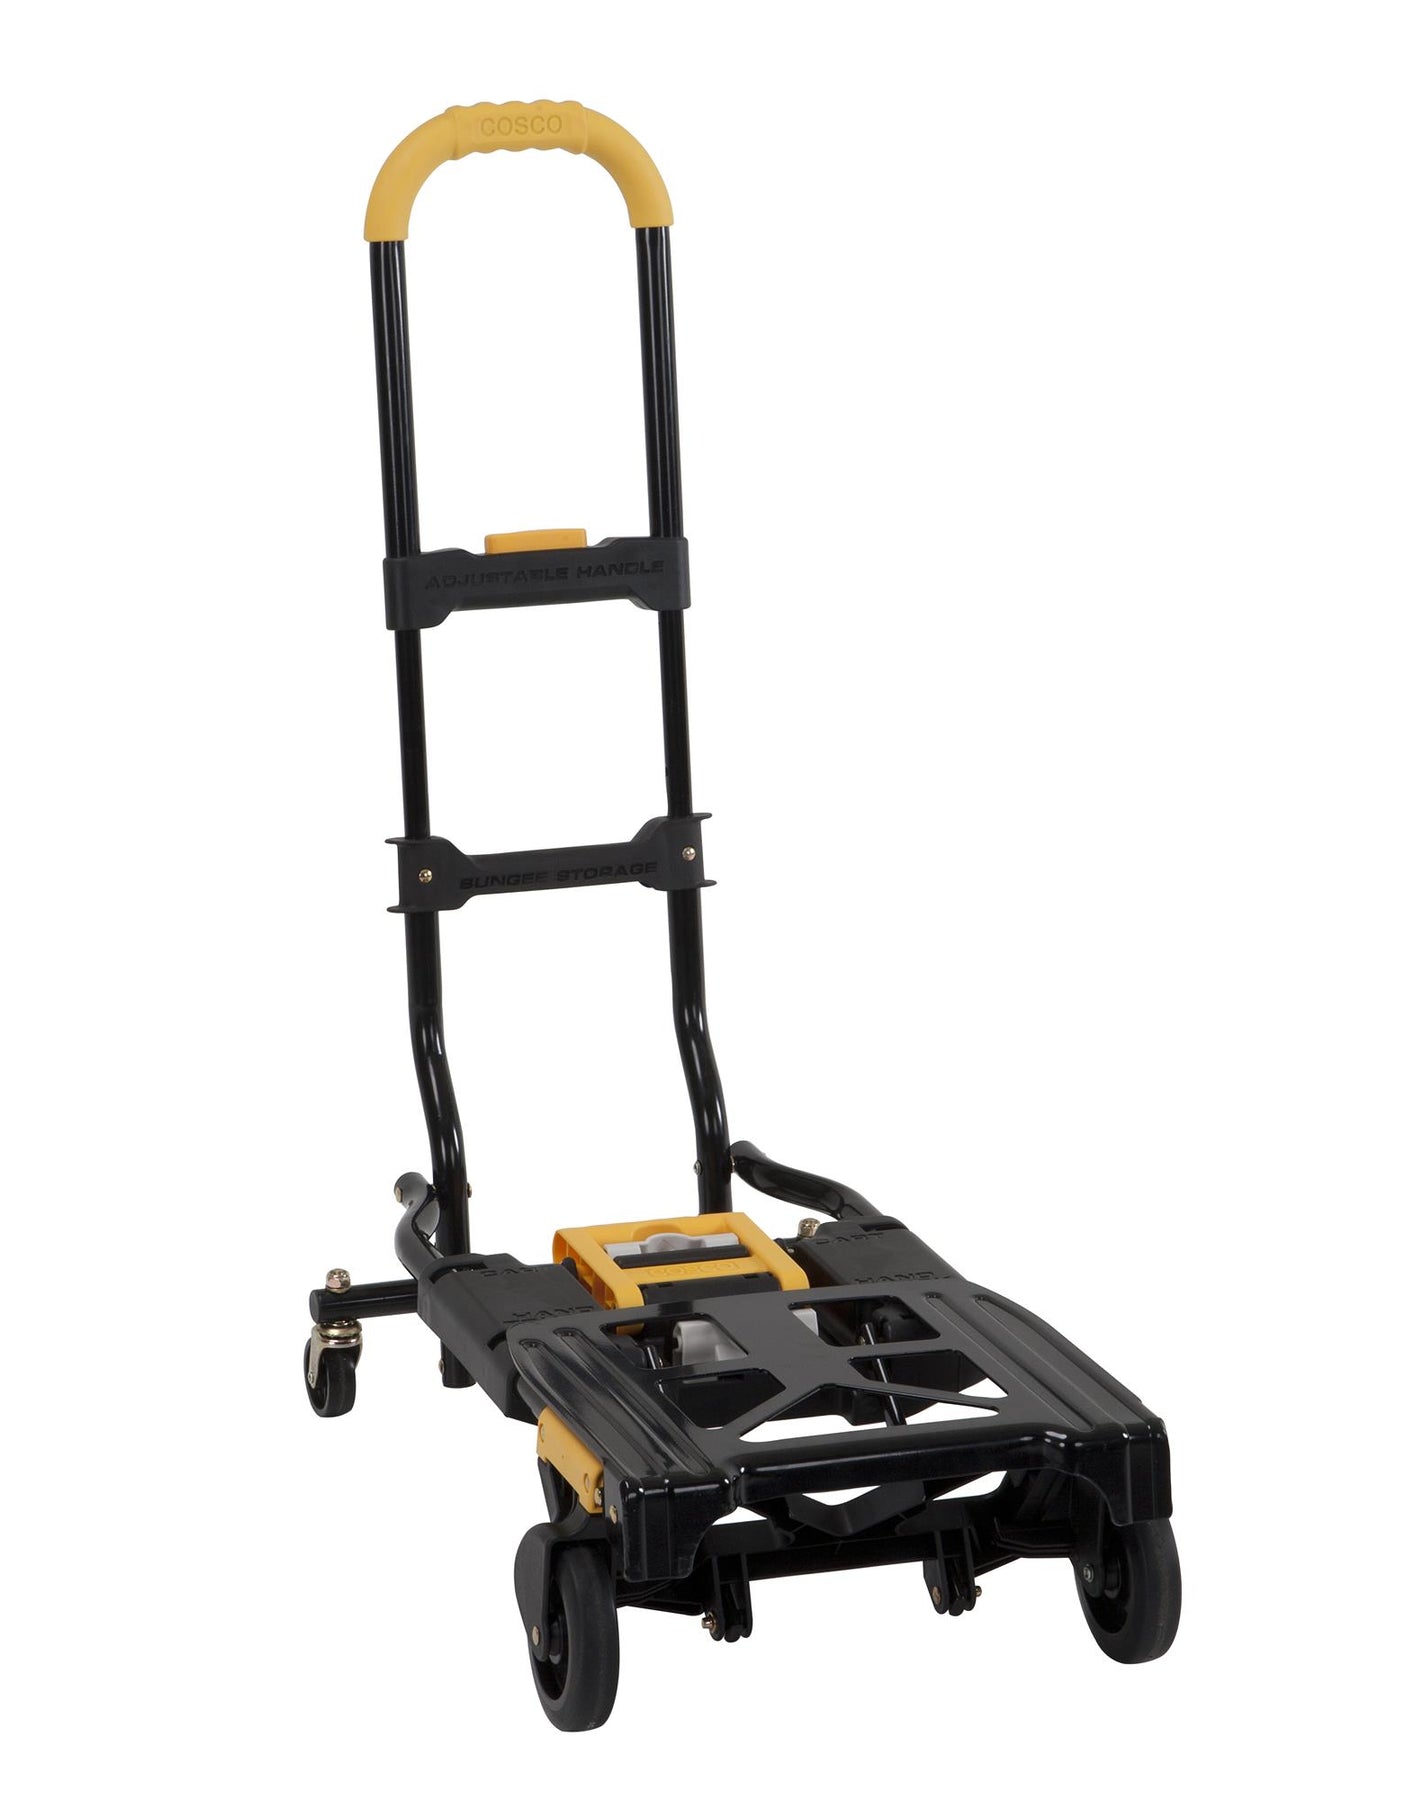 Folding 2 in 1 Multi-Position Hand Truck with Extendable Handle – RealRooms